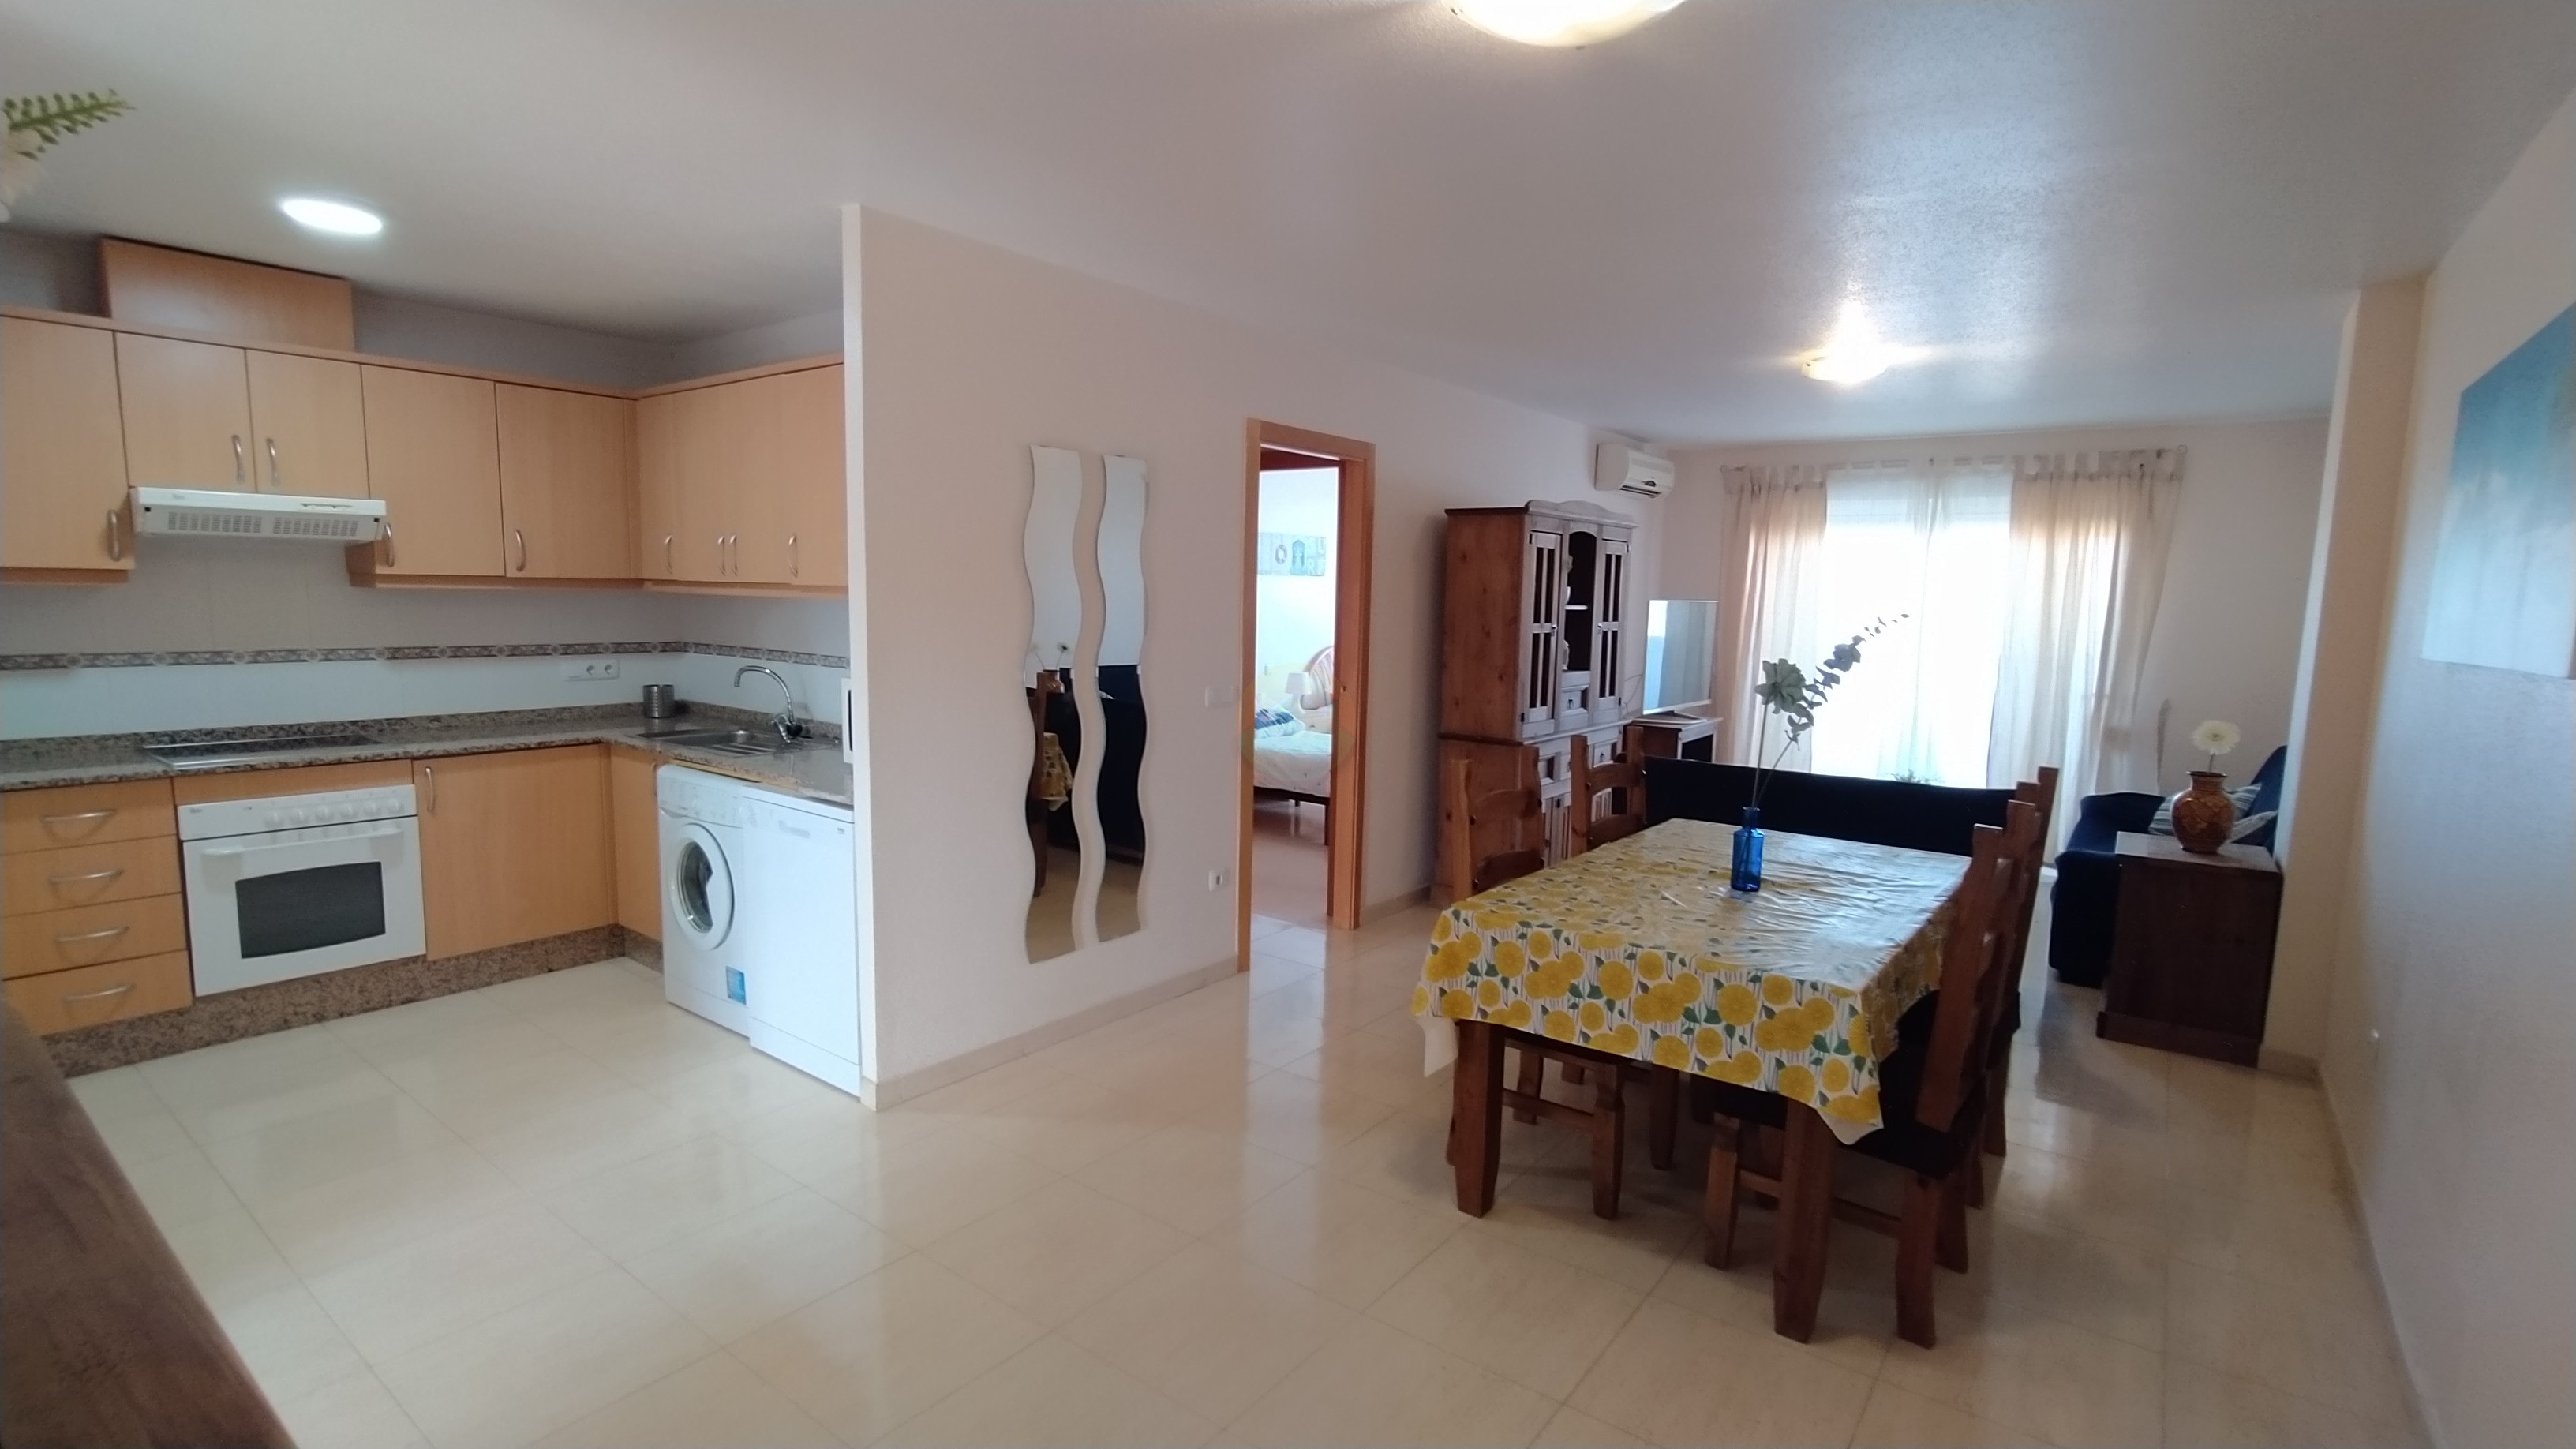 2 bedroom 2 bathroom Apartment For sale